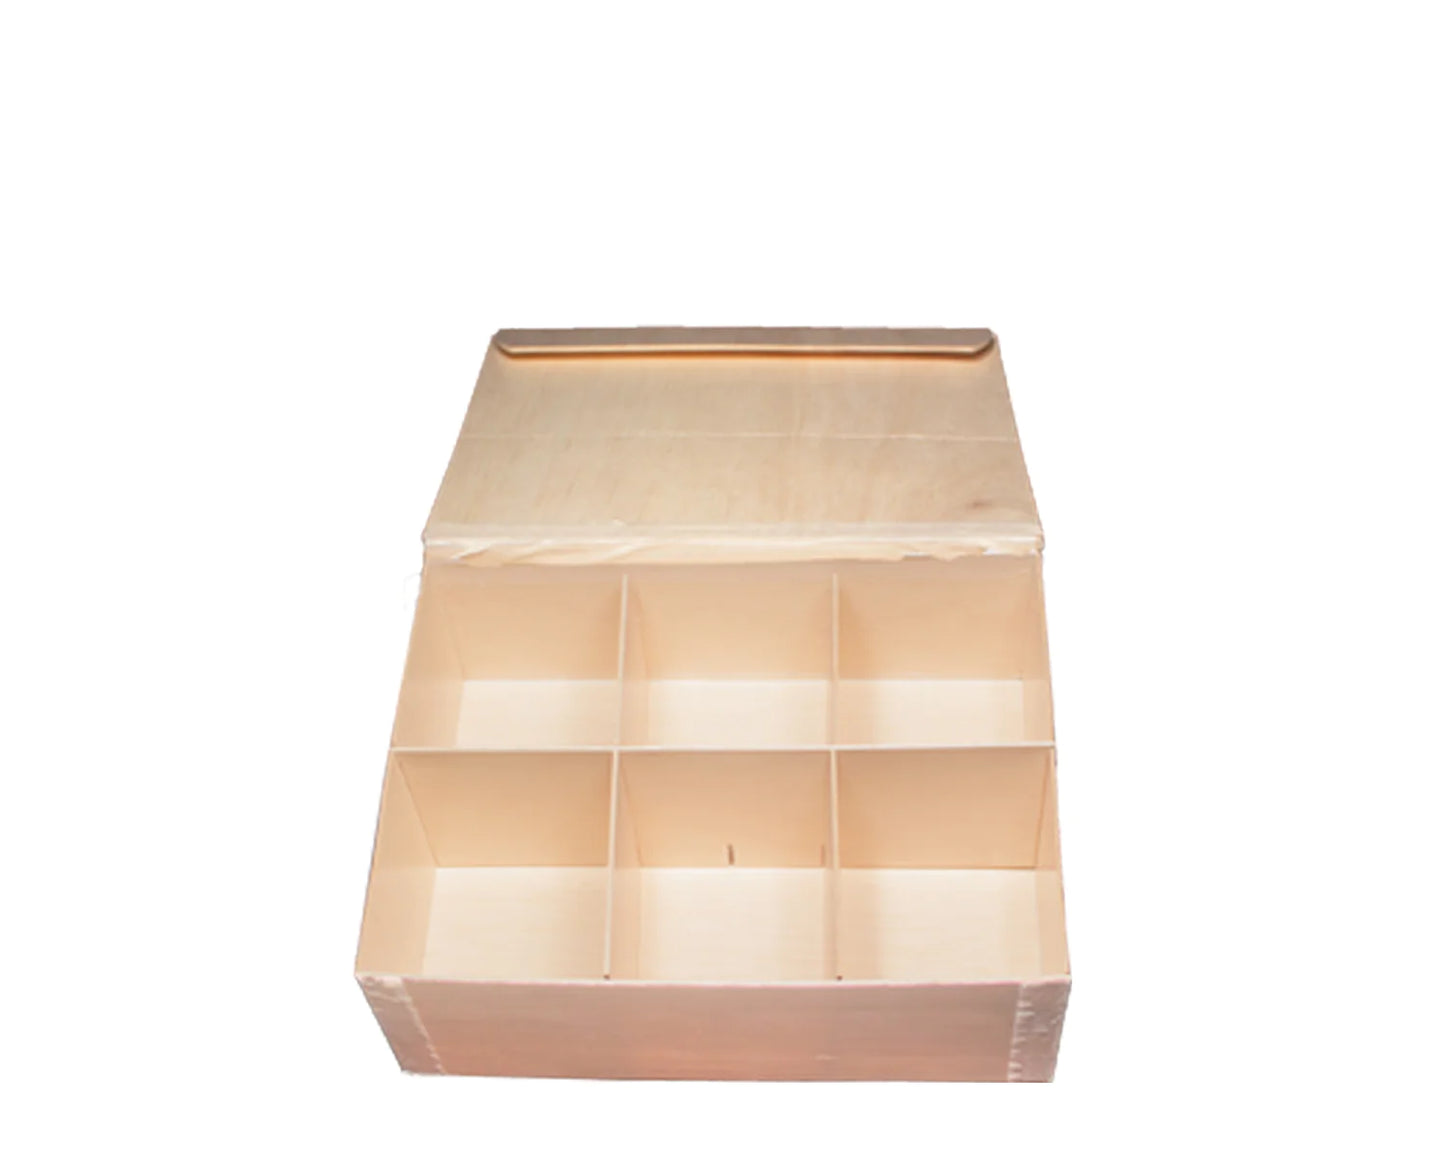 8" x 11" x 3" Collapsible Food Box w/ Attached Lid | Large | 3 Dividers